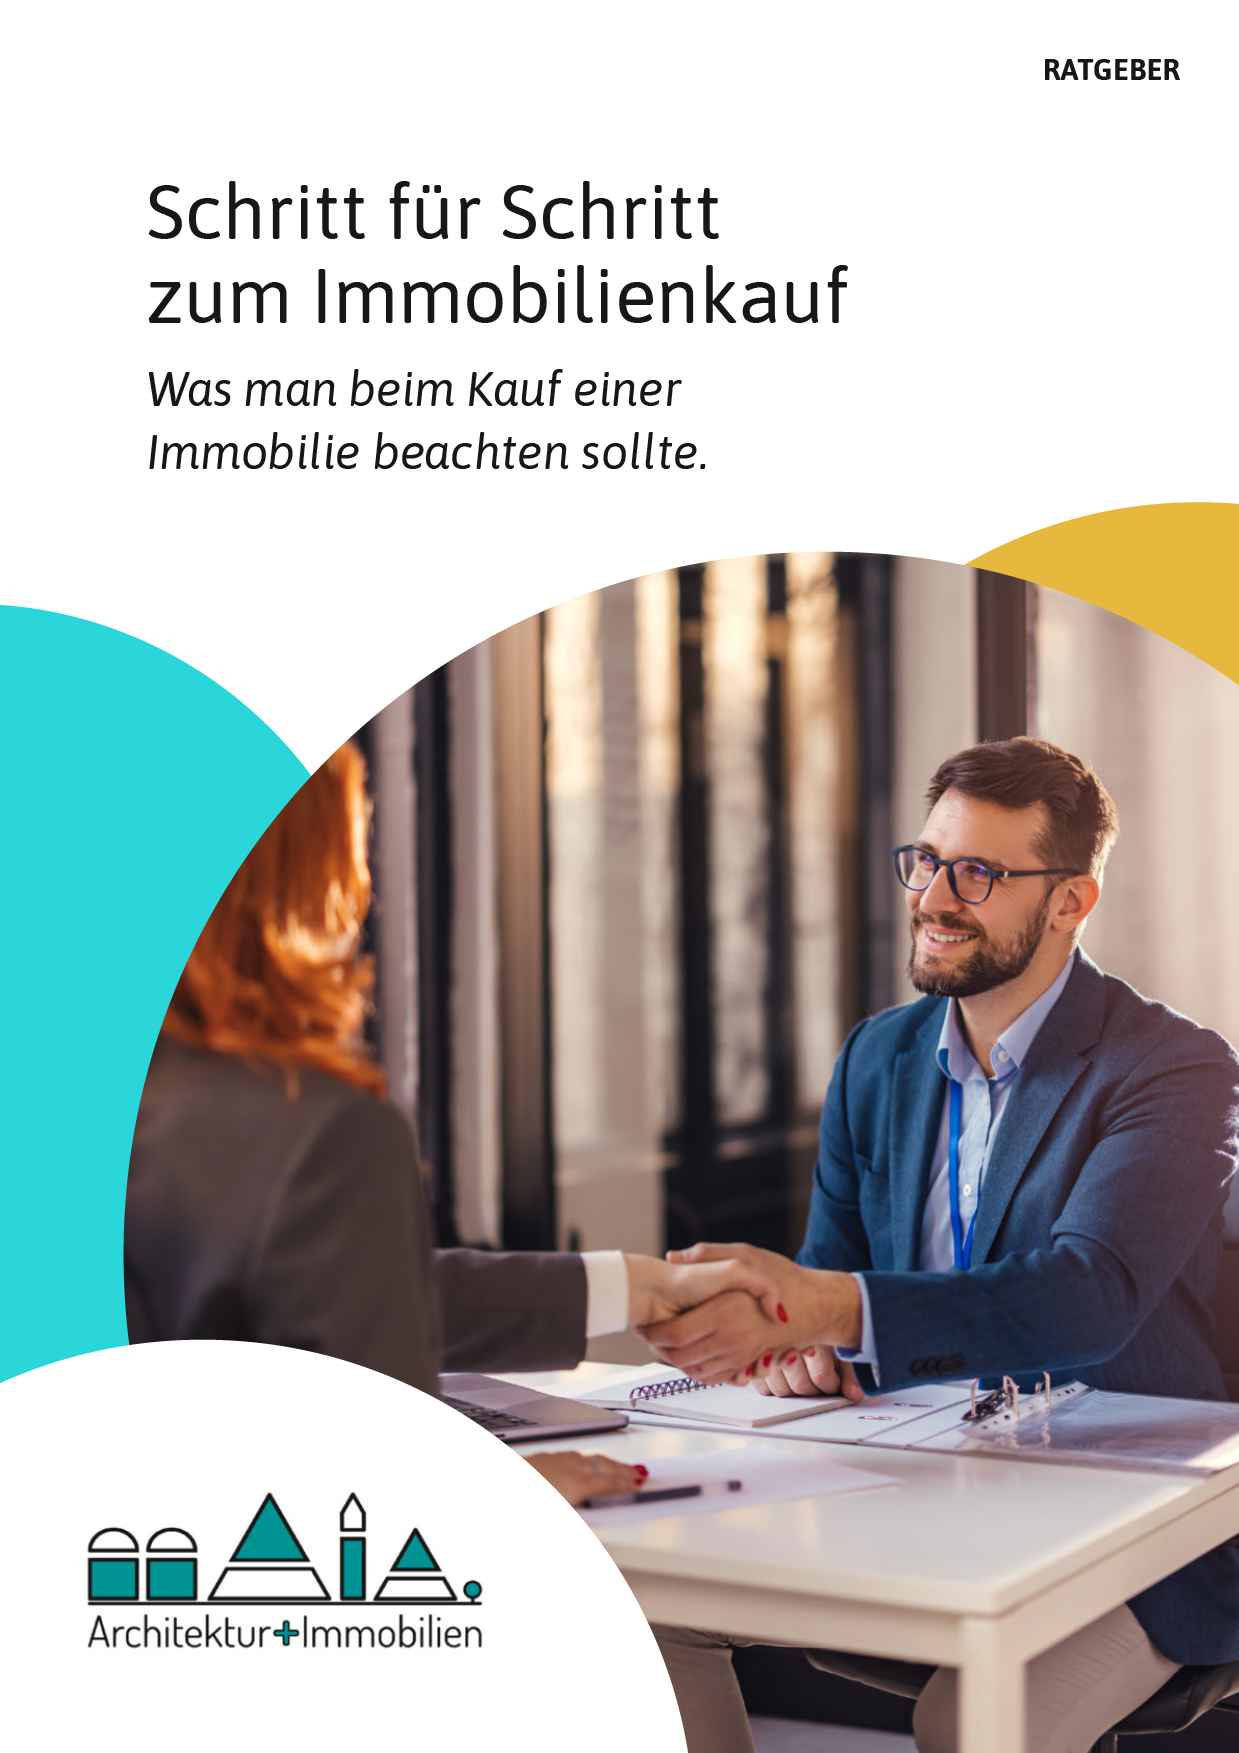 Cover Immobilienkauf